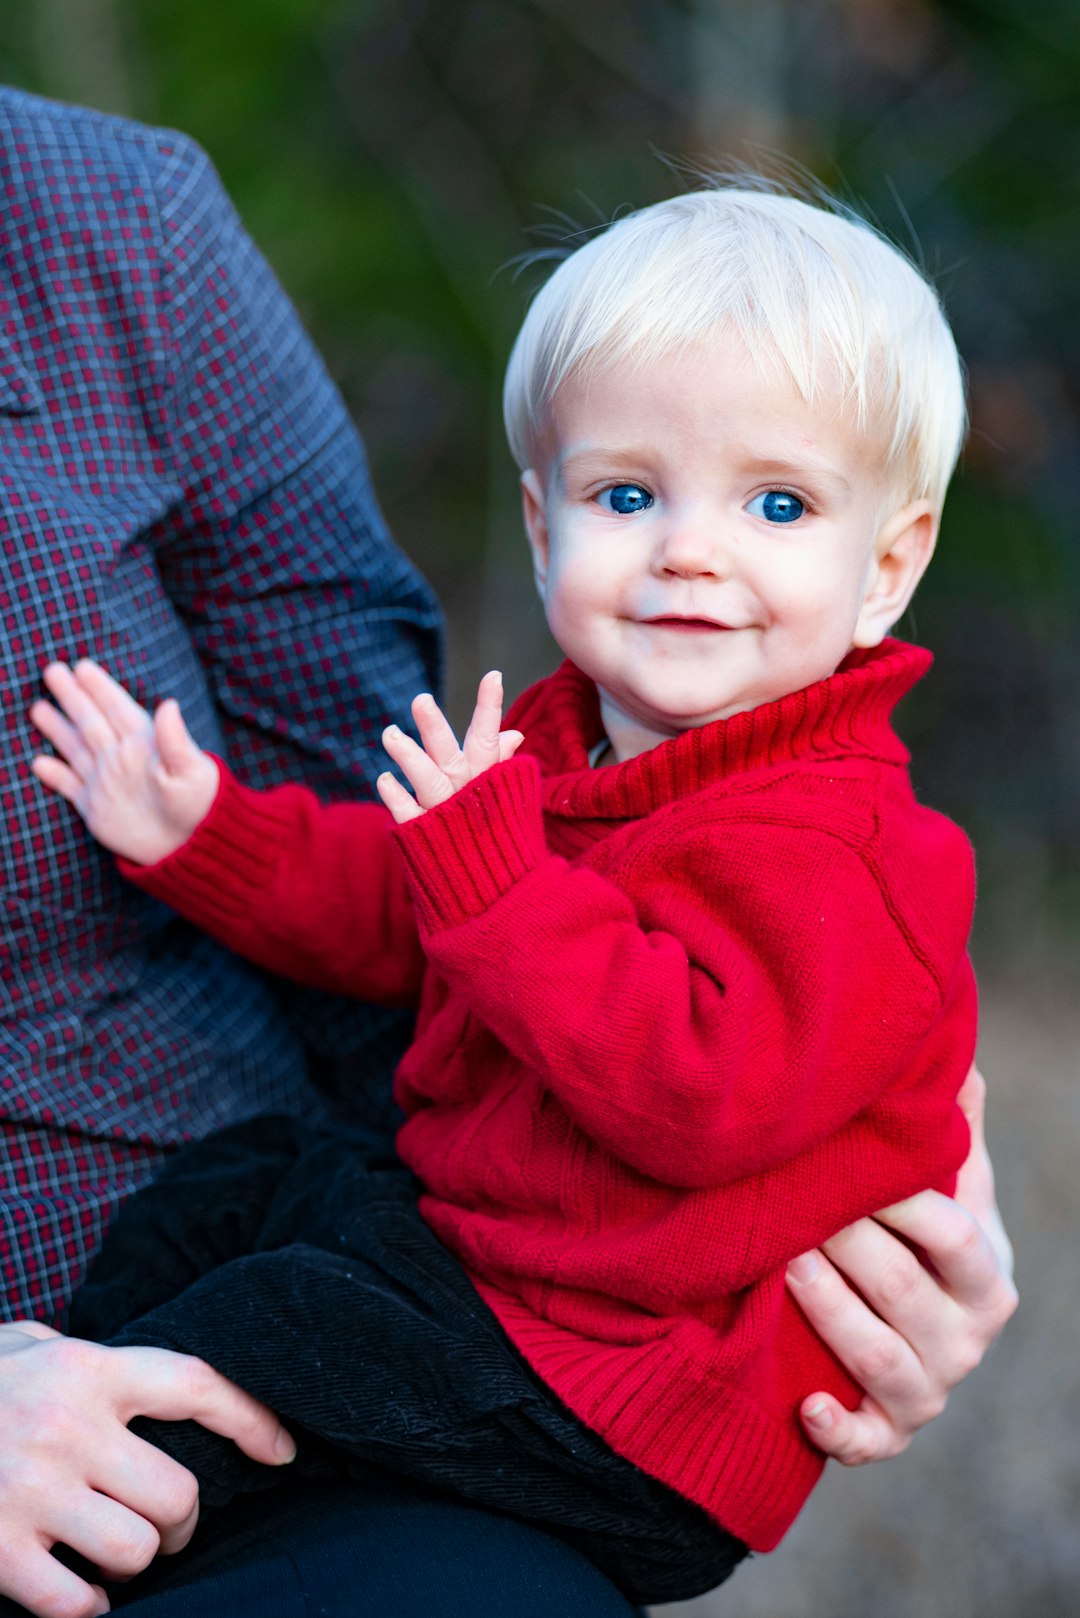 baby in red sweater and blue denim jeans